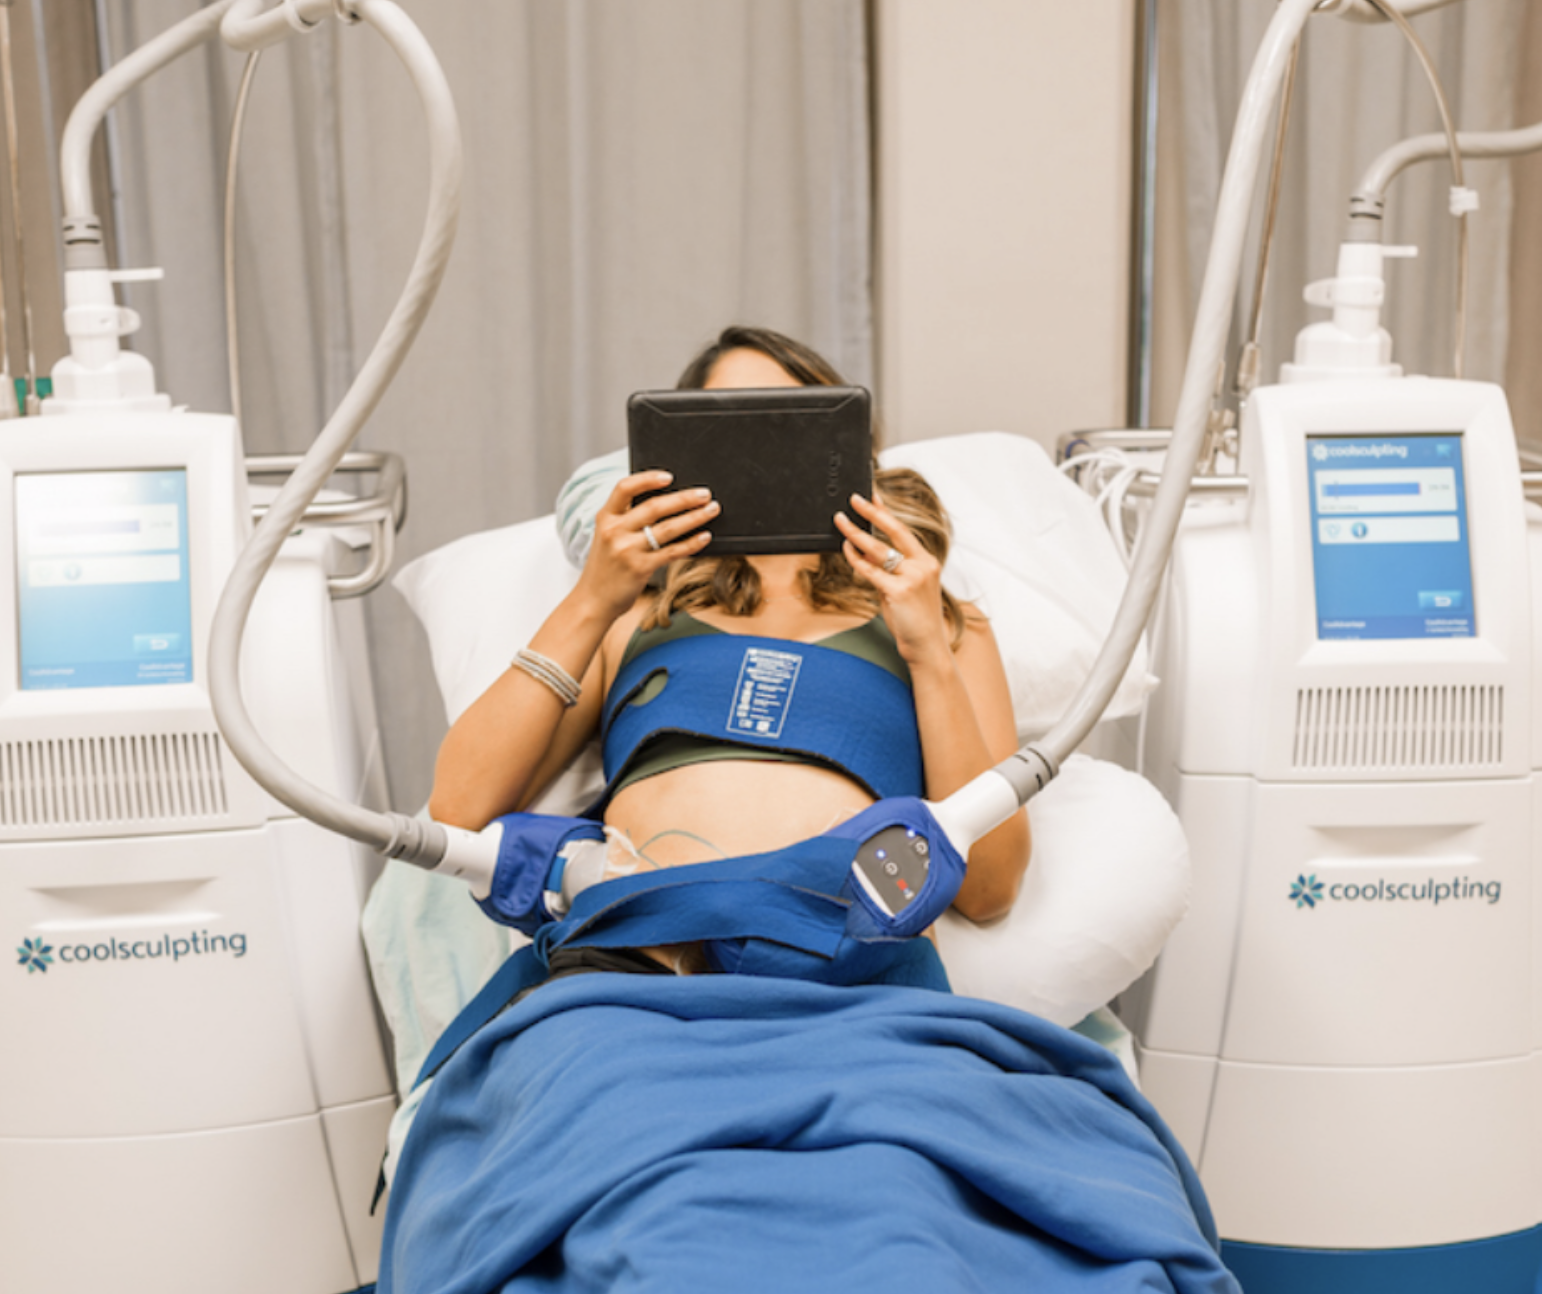 how to speed up coolsculpting results